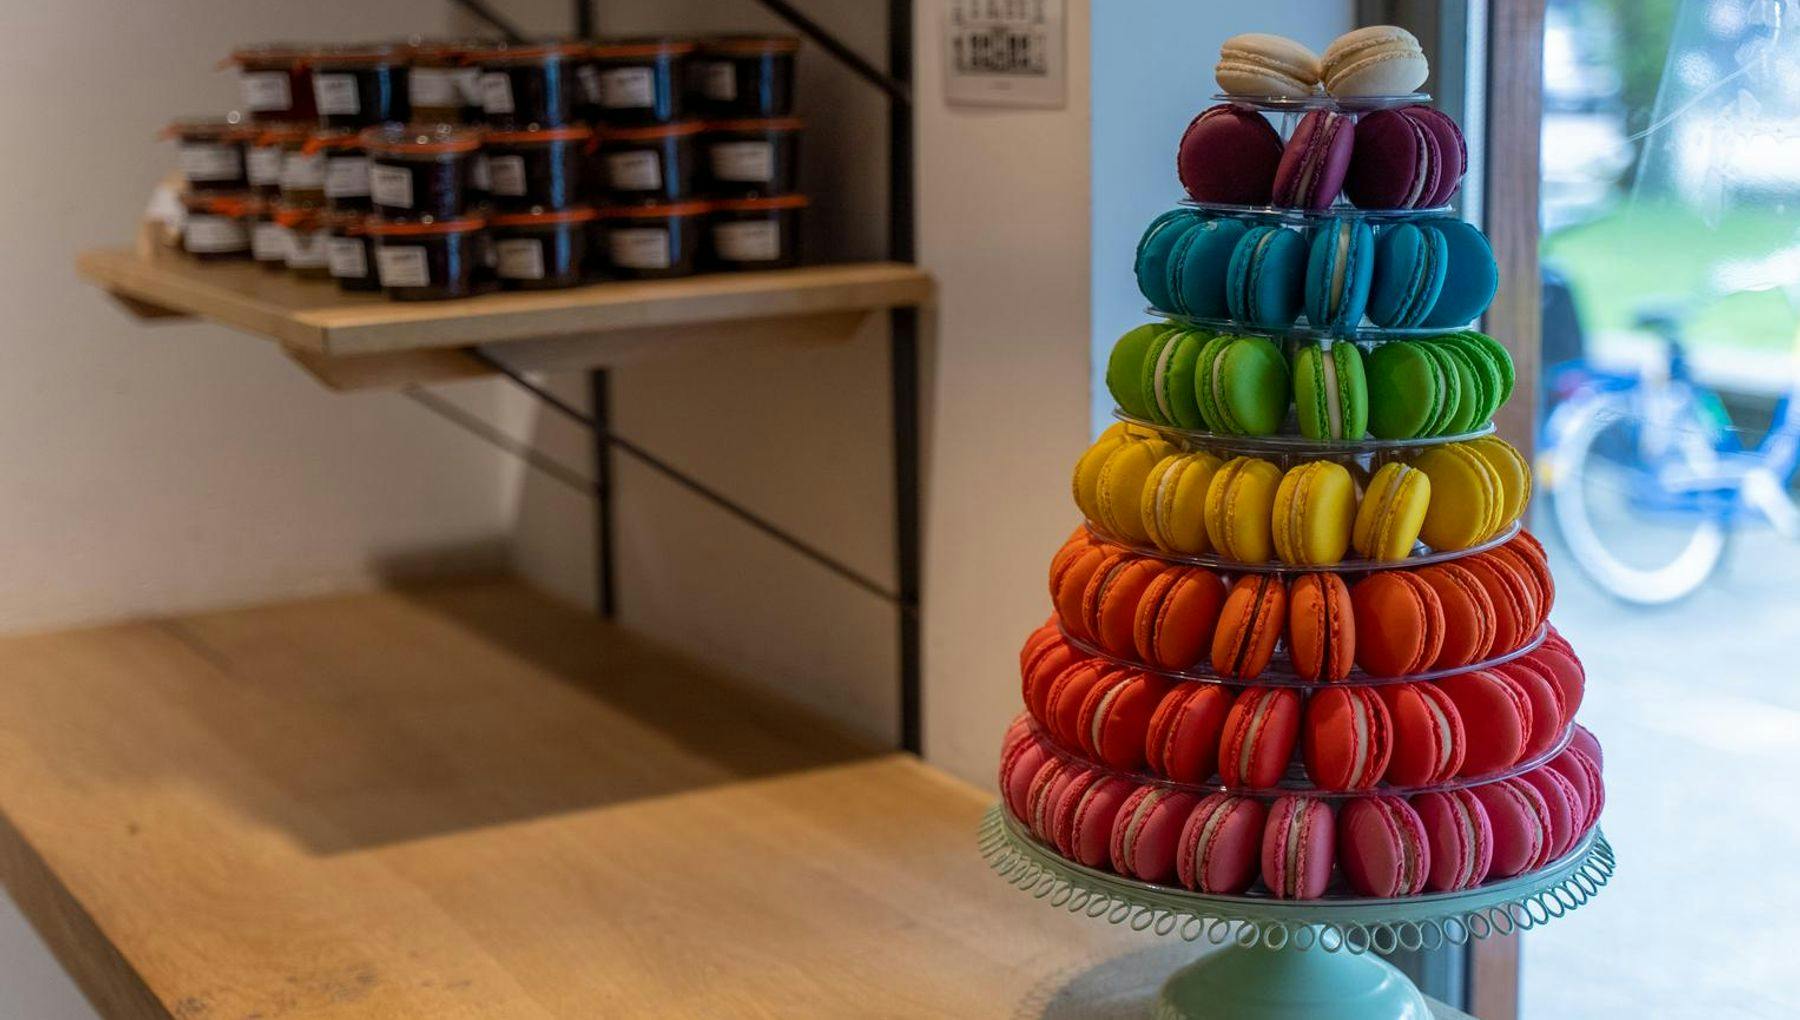 Tout Patisserie, macarons in different colors